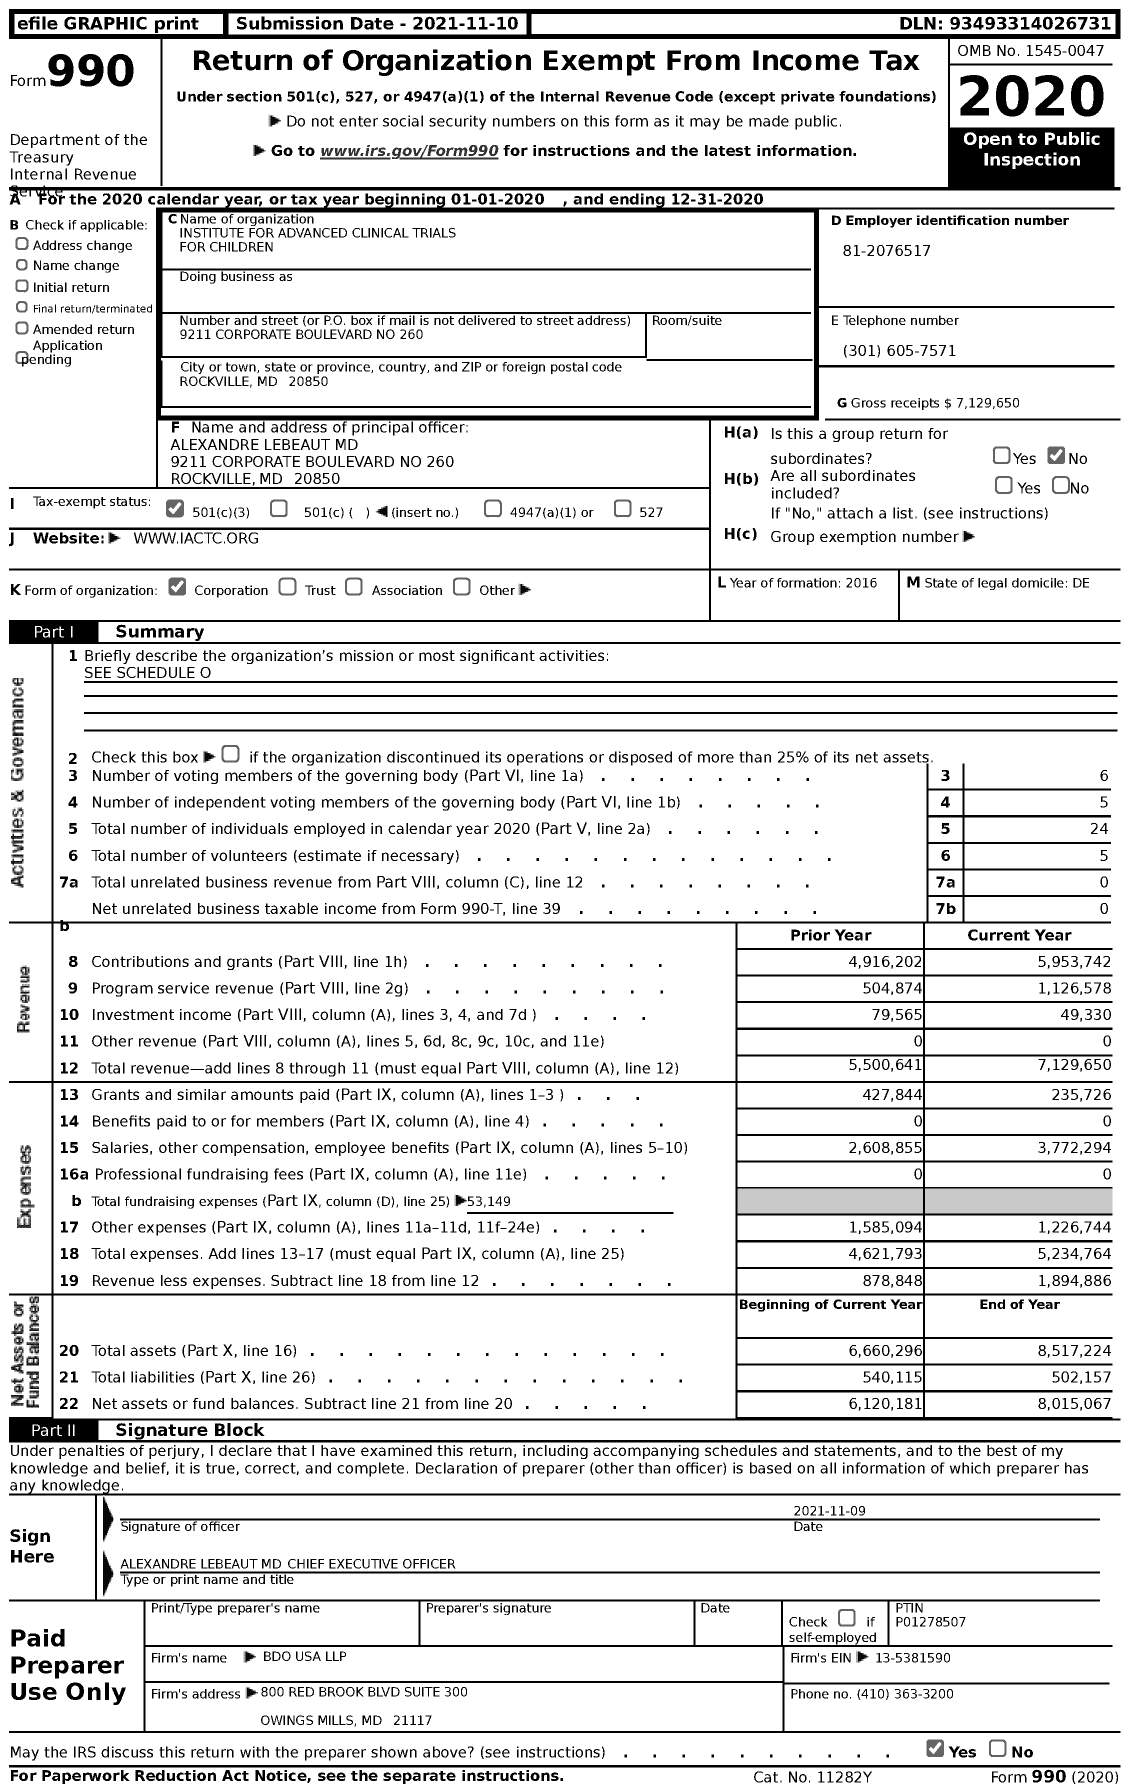 Image of first page of 2020 Form 990 for Institute for Advanced Clinical Trials for Children